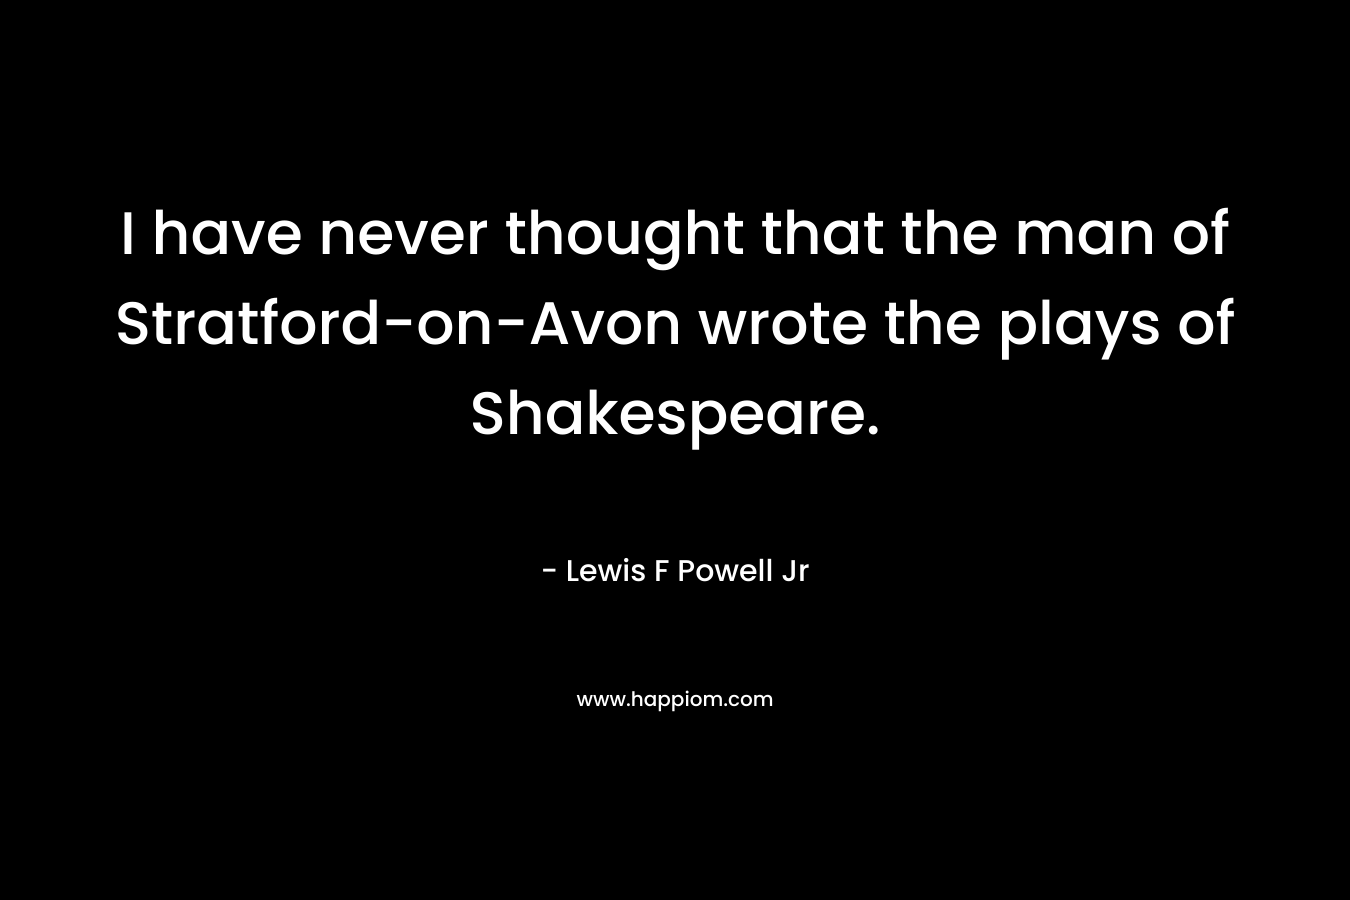 I have never thought that the man of Stratford-on-Avon wrote the plays of Shakespeare.